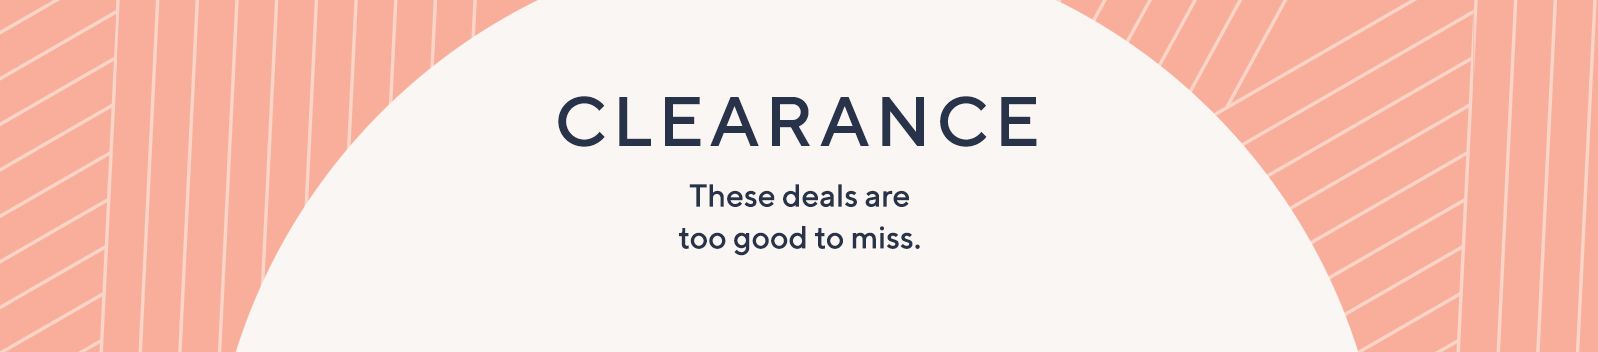 Clearance: These deals are too good to miss. 